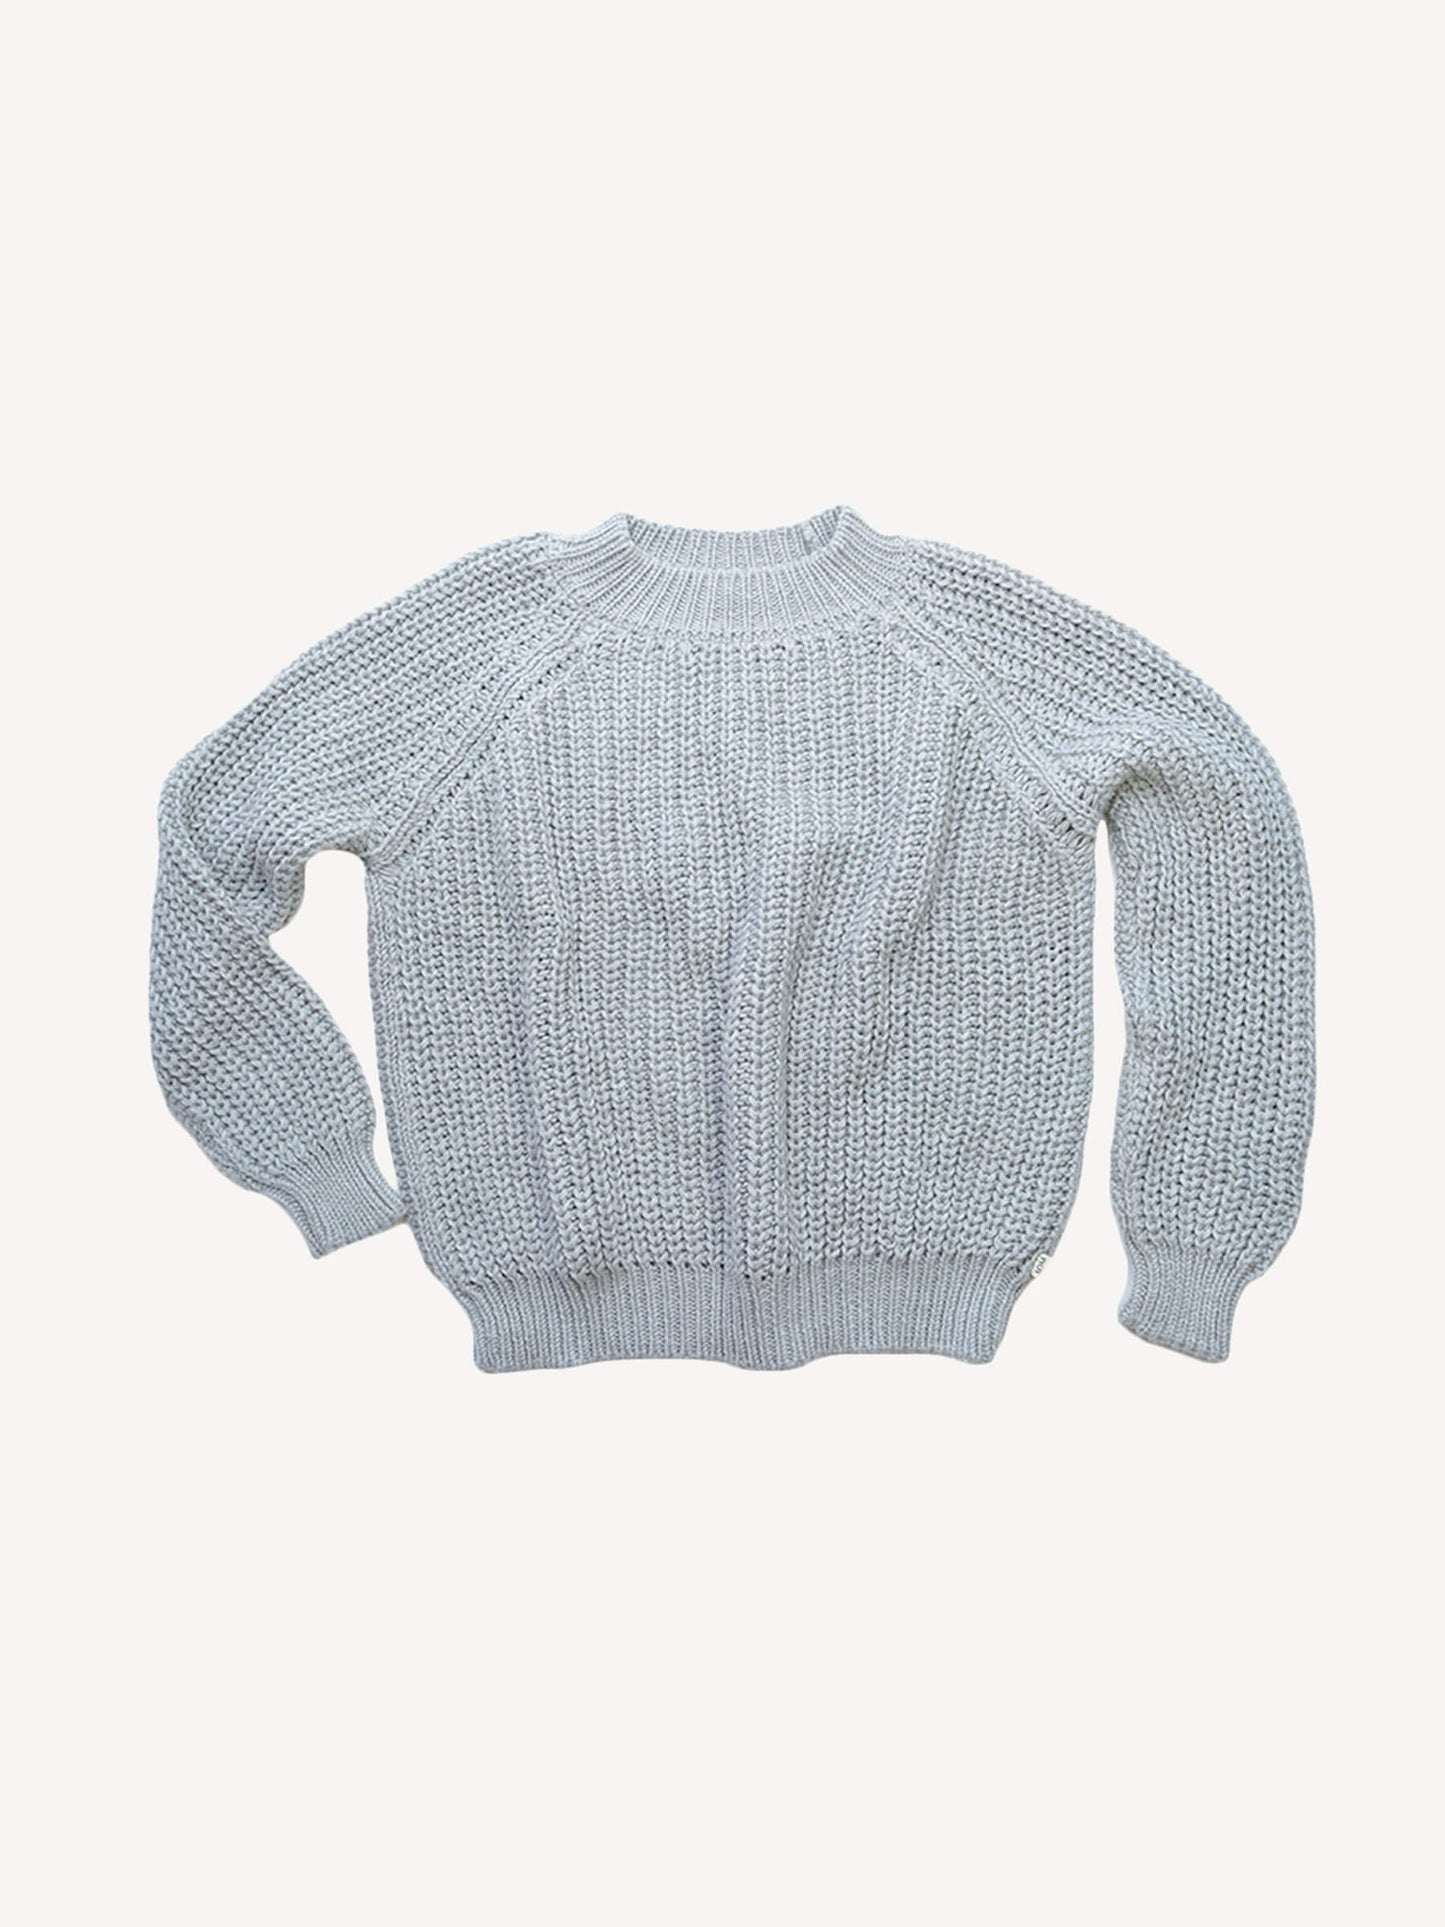 Adult's Fishline Sweater Silver